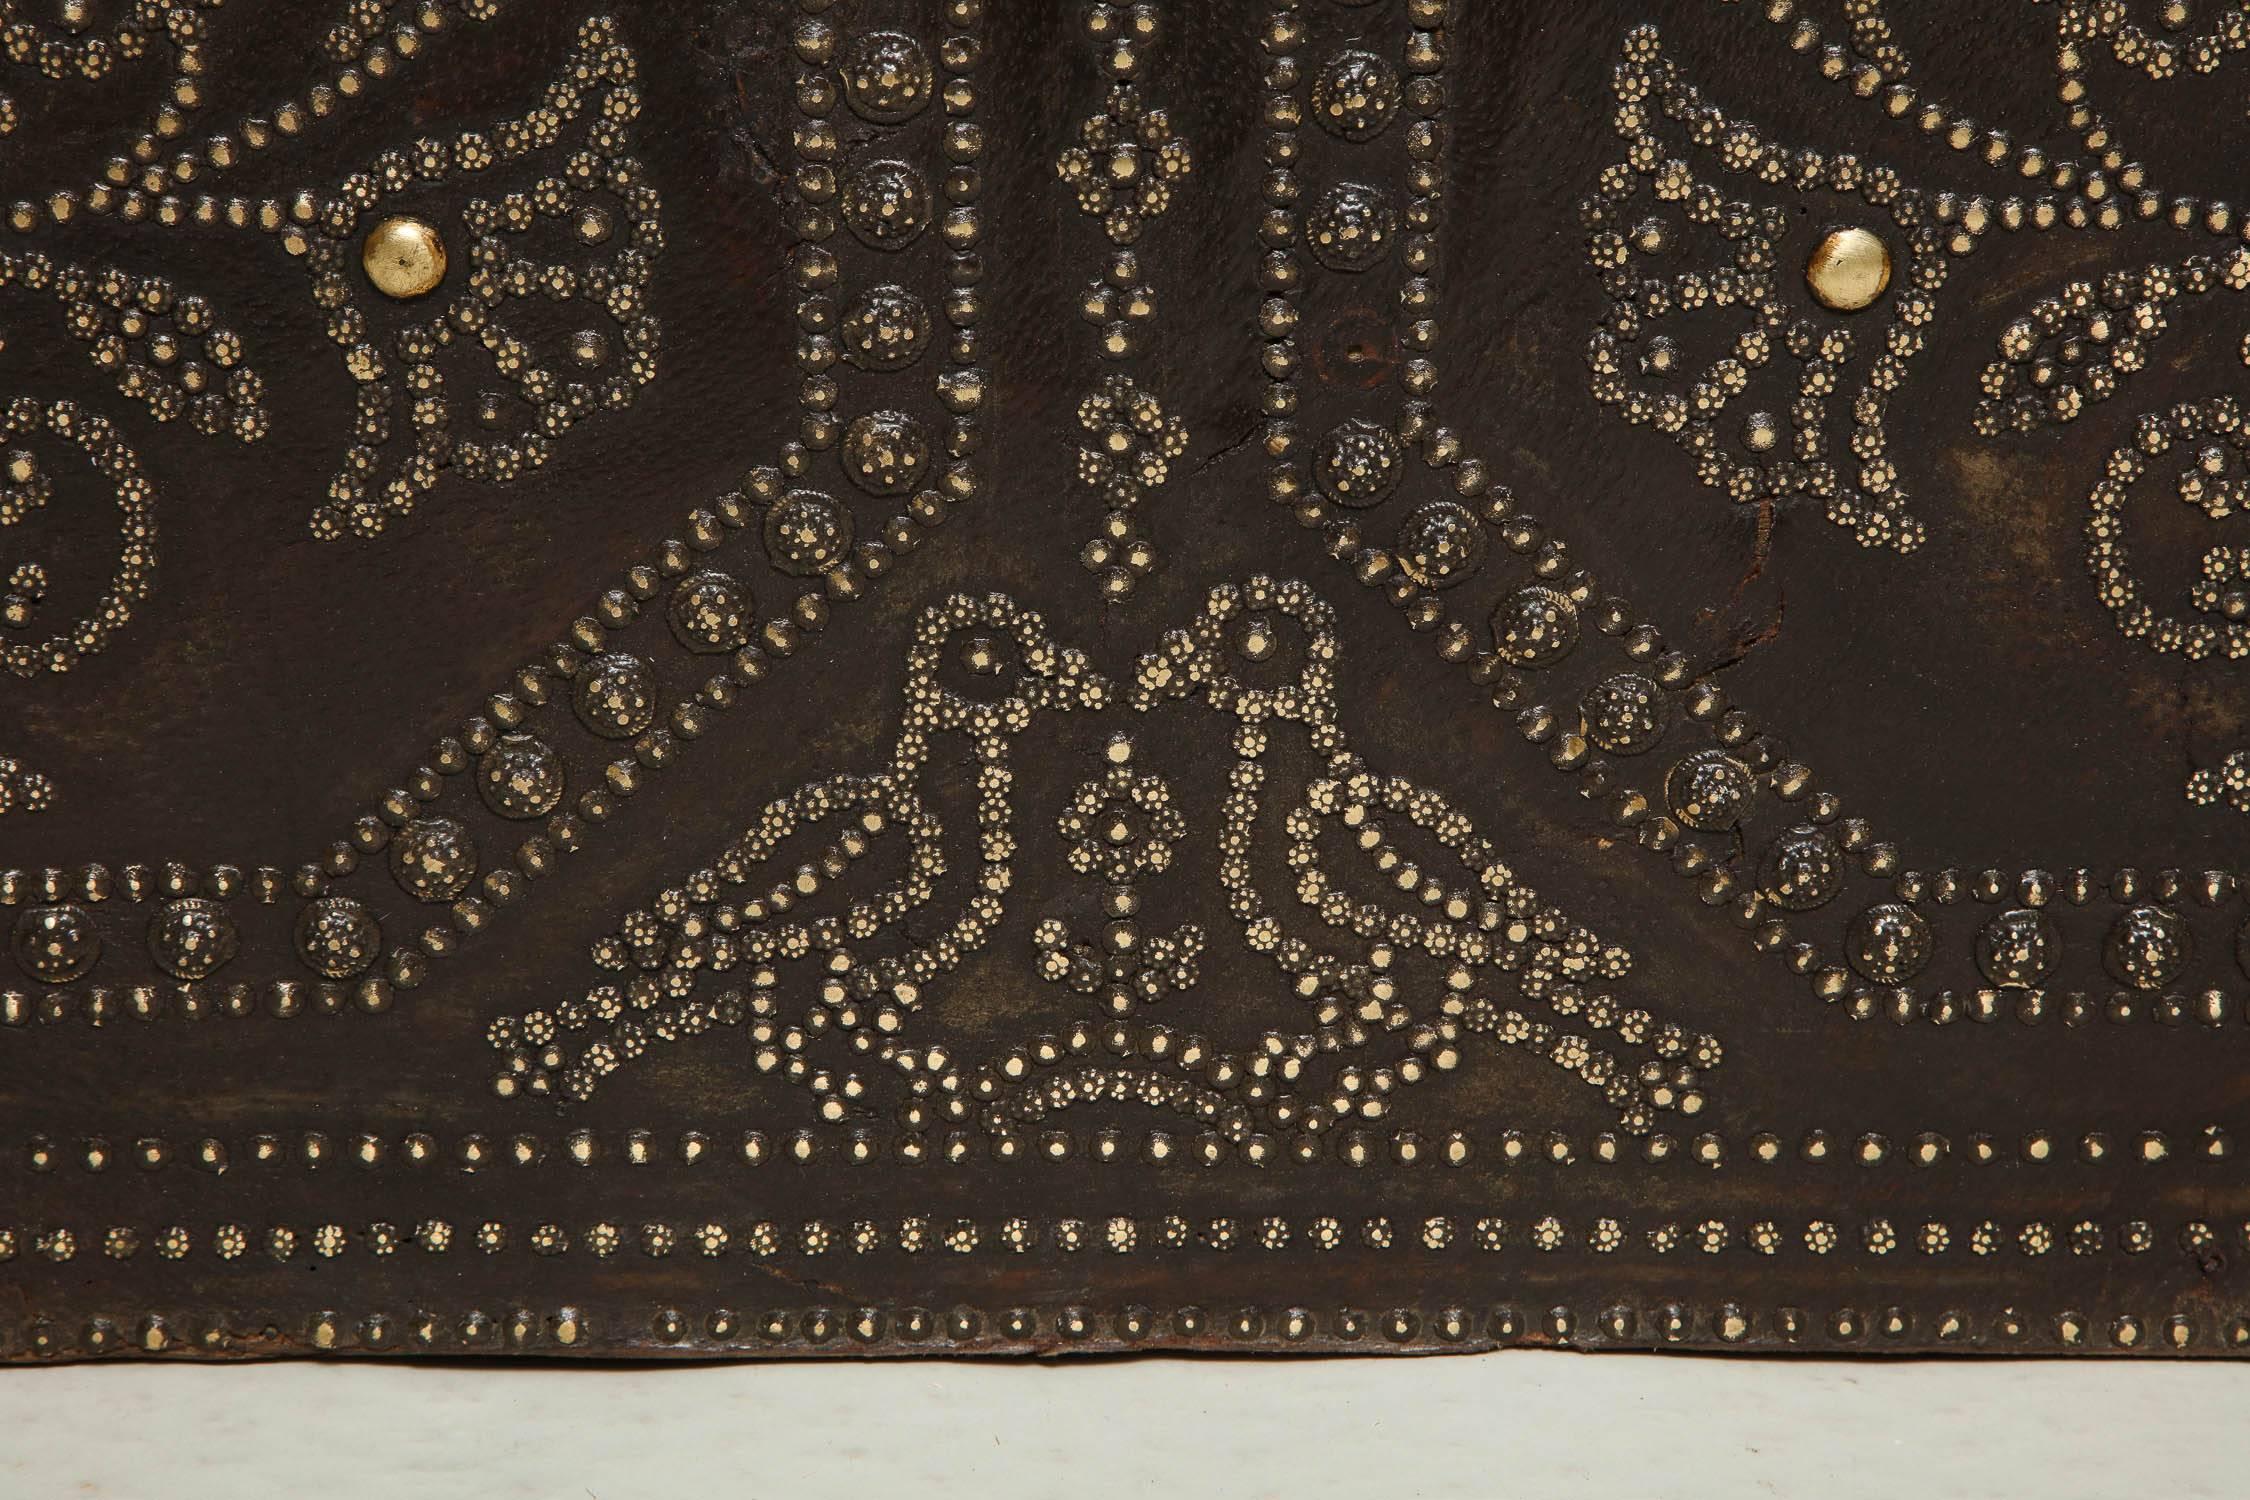 European Profusely Studded Royal Leather Trunk